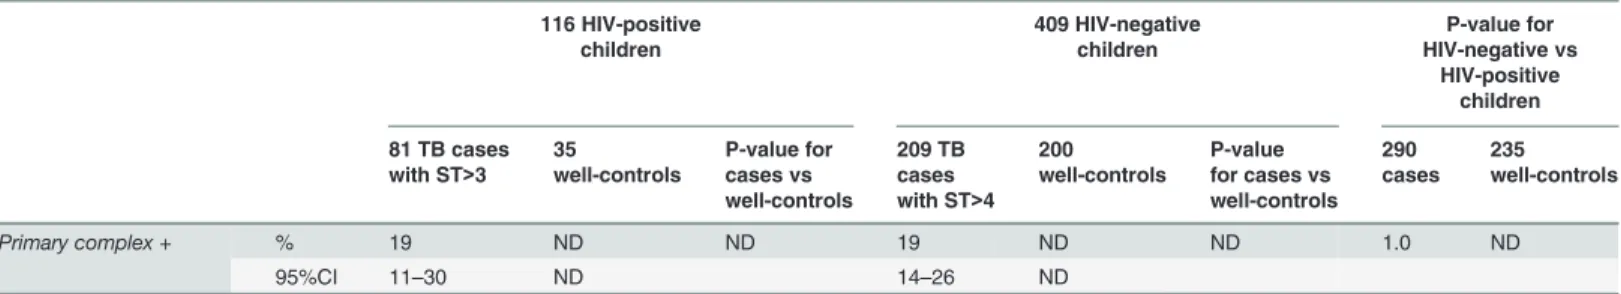 Table 1. (Continued) 116 HIV-positive children 409 HIV-negativechildren P-value for HIV-negative vs HIV-positive children 81 TB cases with ST&gt;3 35 well-controls P-value forcases vs well-controls 209 TBcases with ST&gt;4 200 well-controls P-value for cas